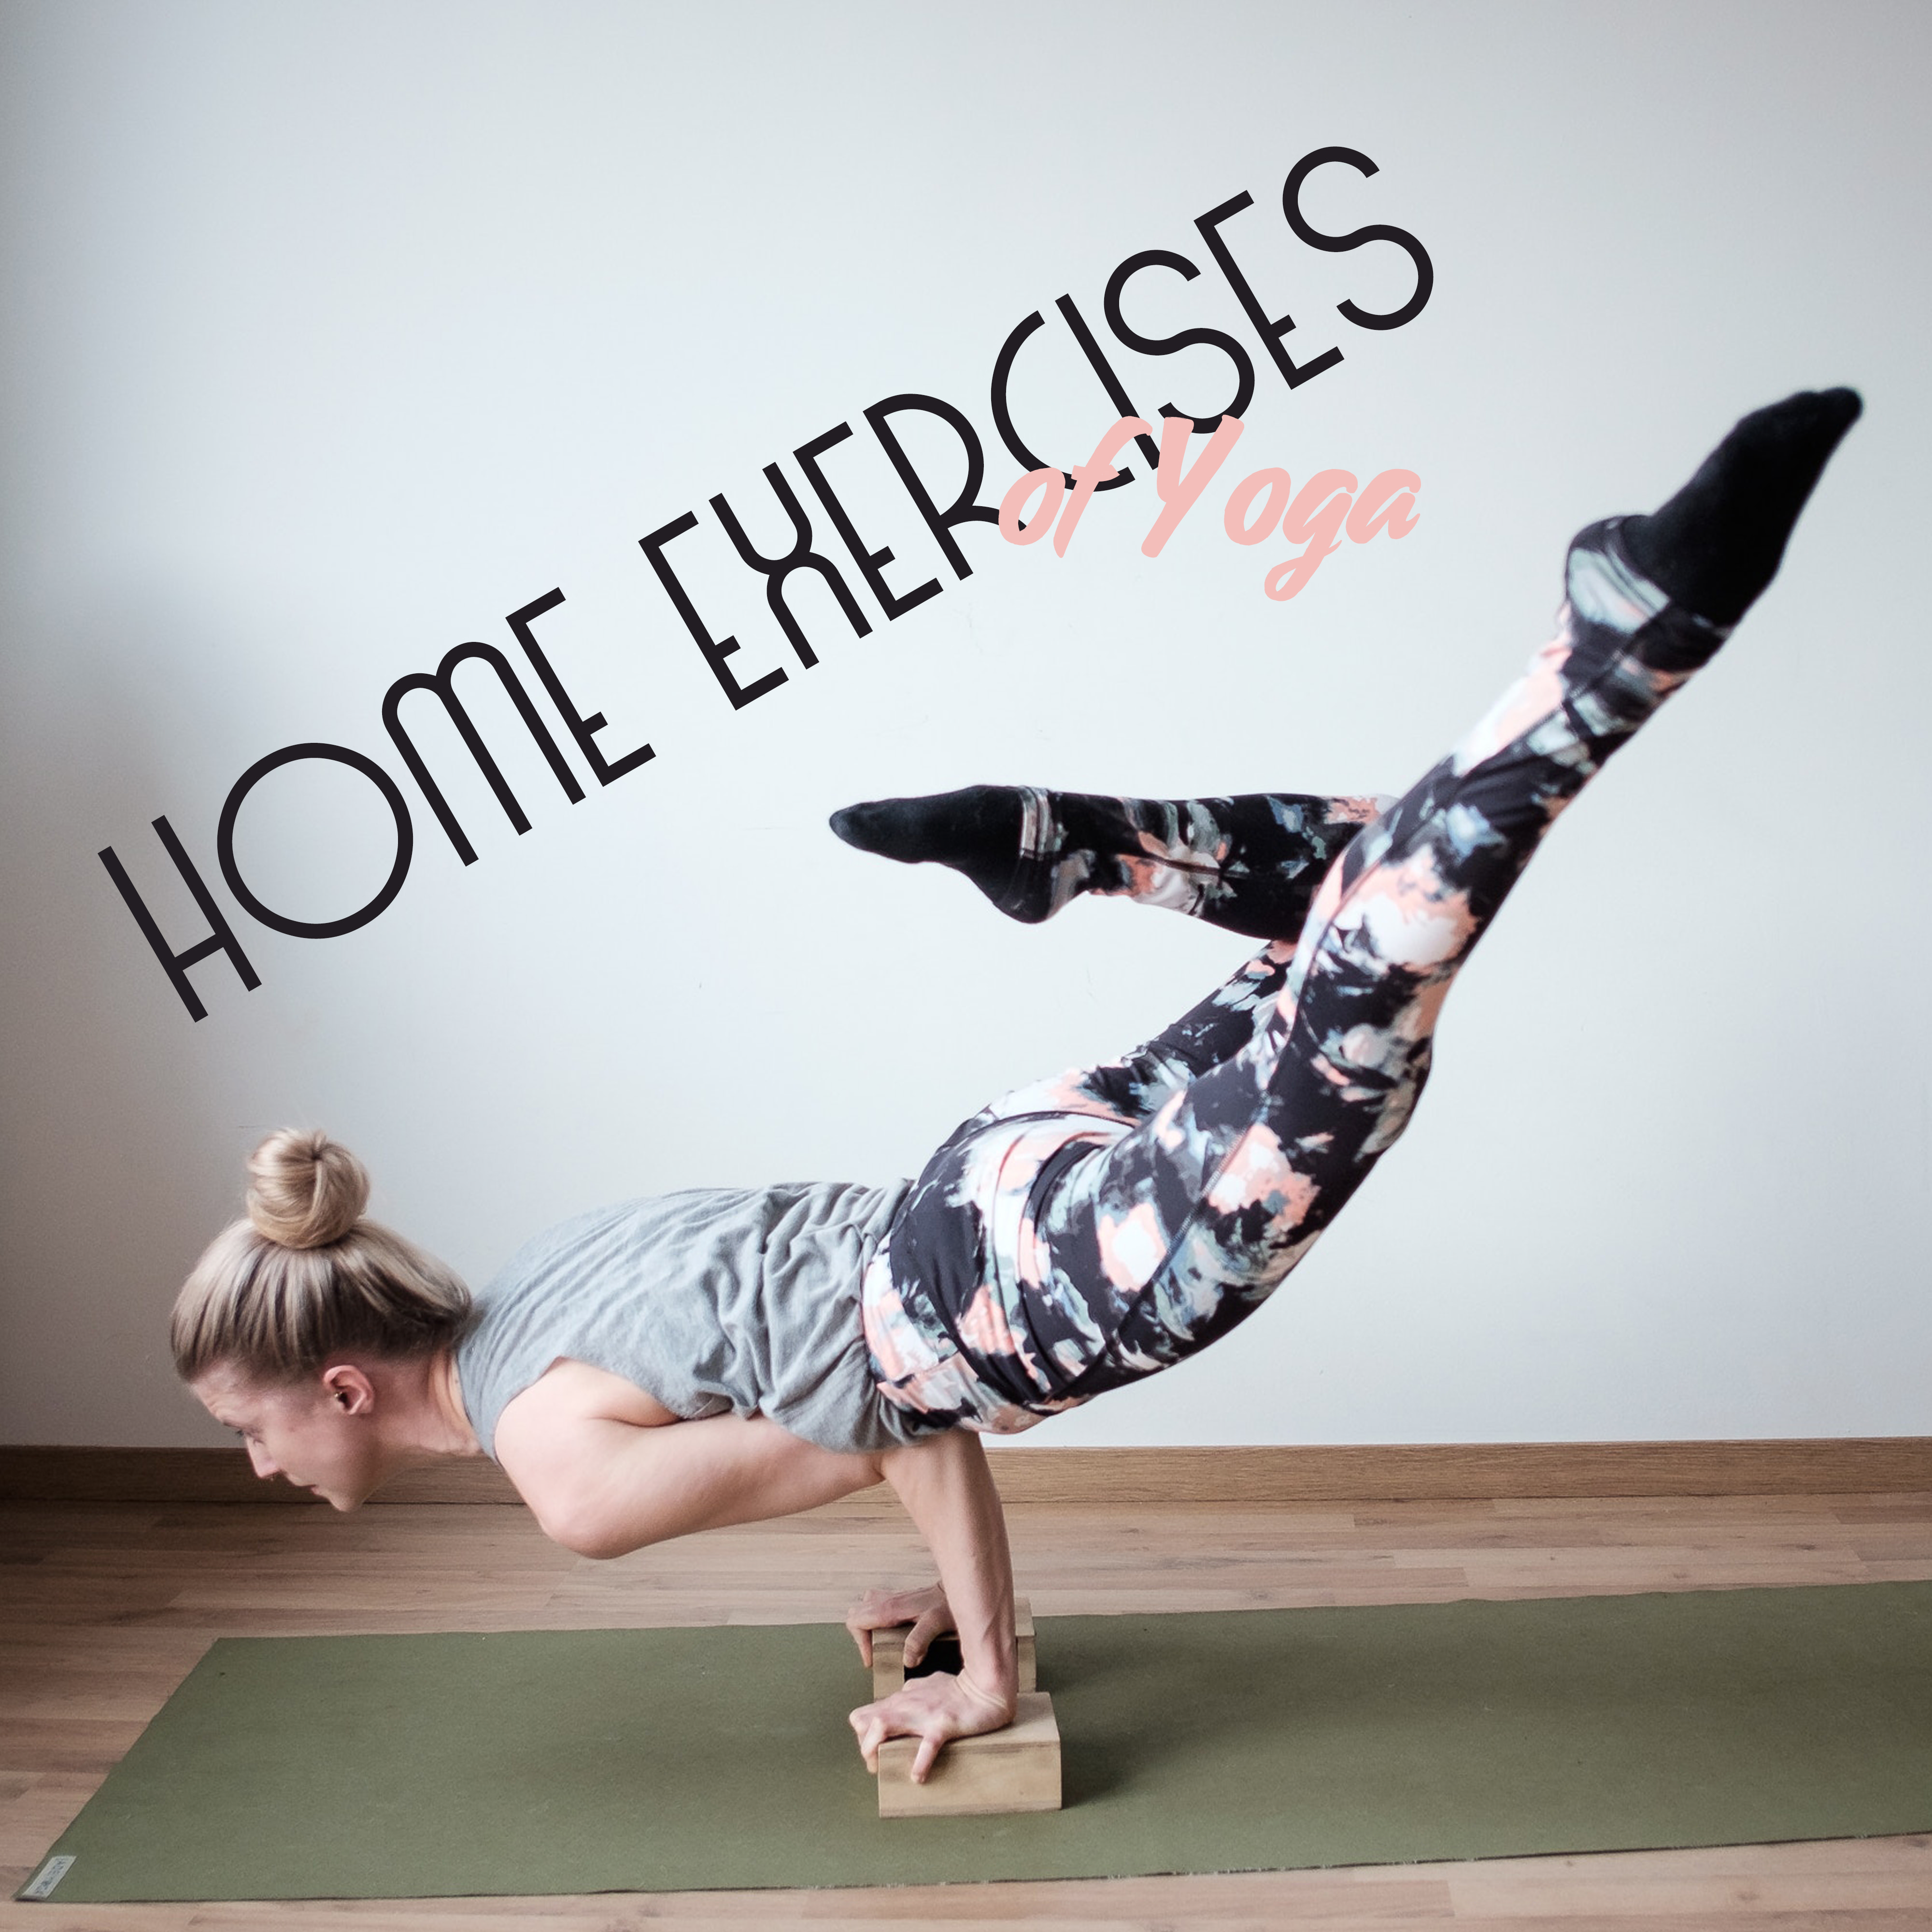 Home Exercises of Yoga